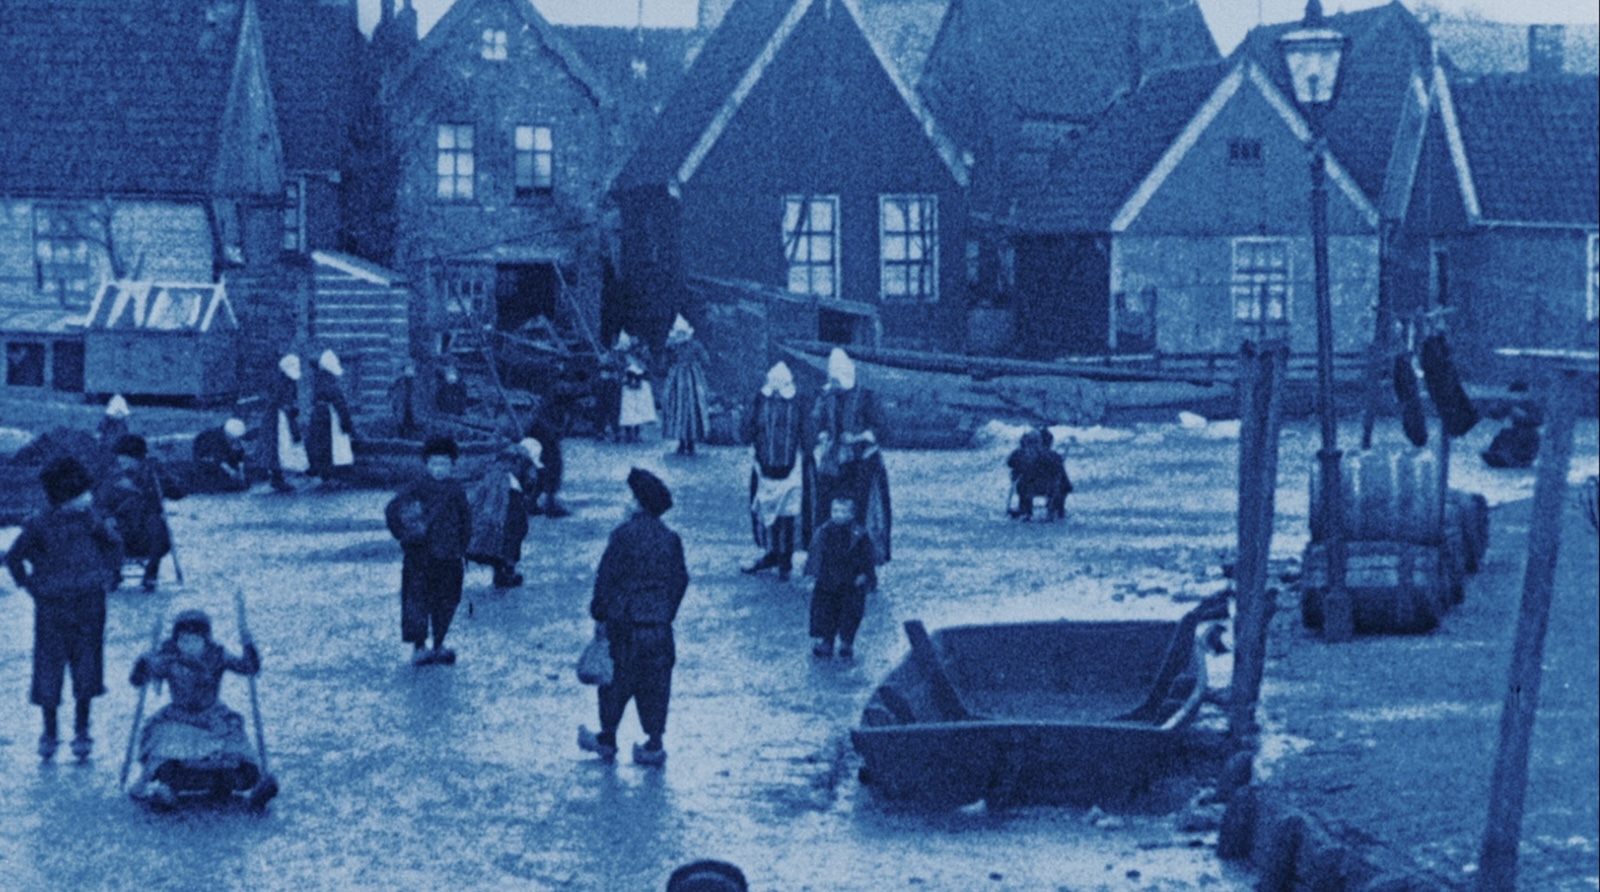 A blue-tinted image of a village in the Netherlands from the turn of the 20th century, with people walking across an icy street